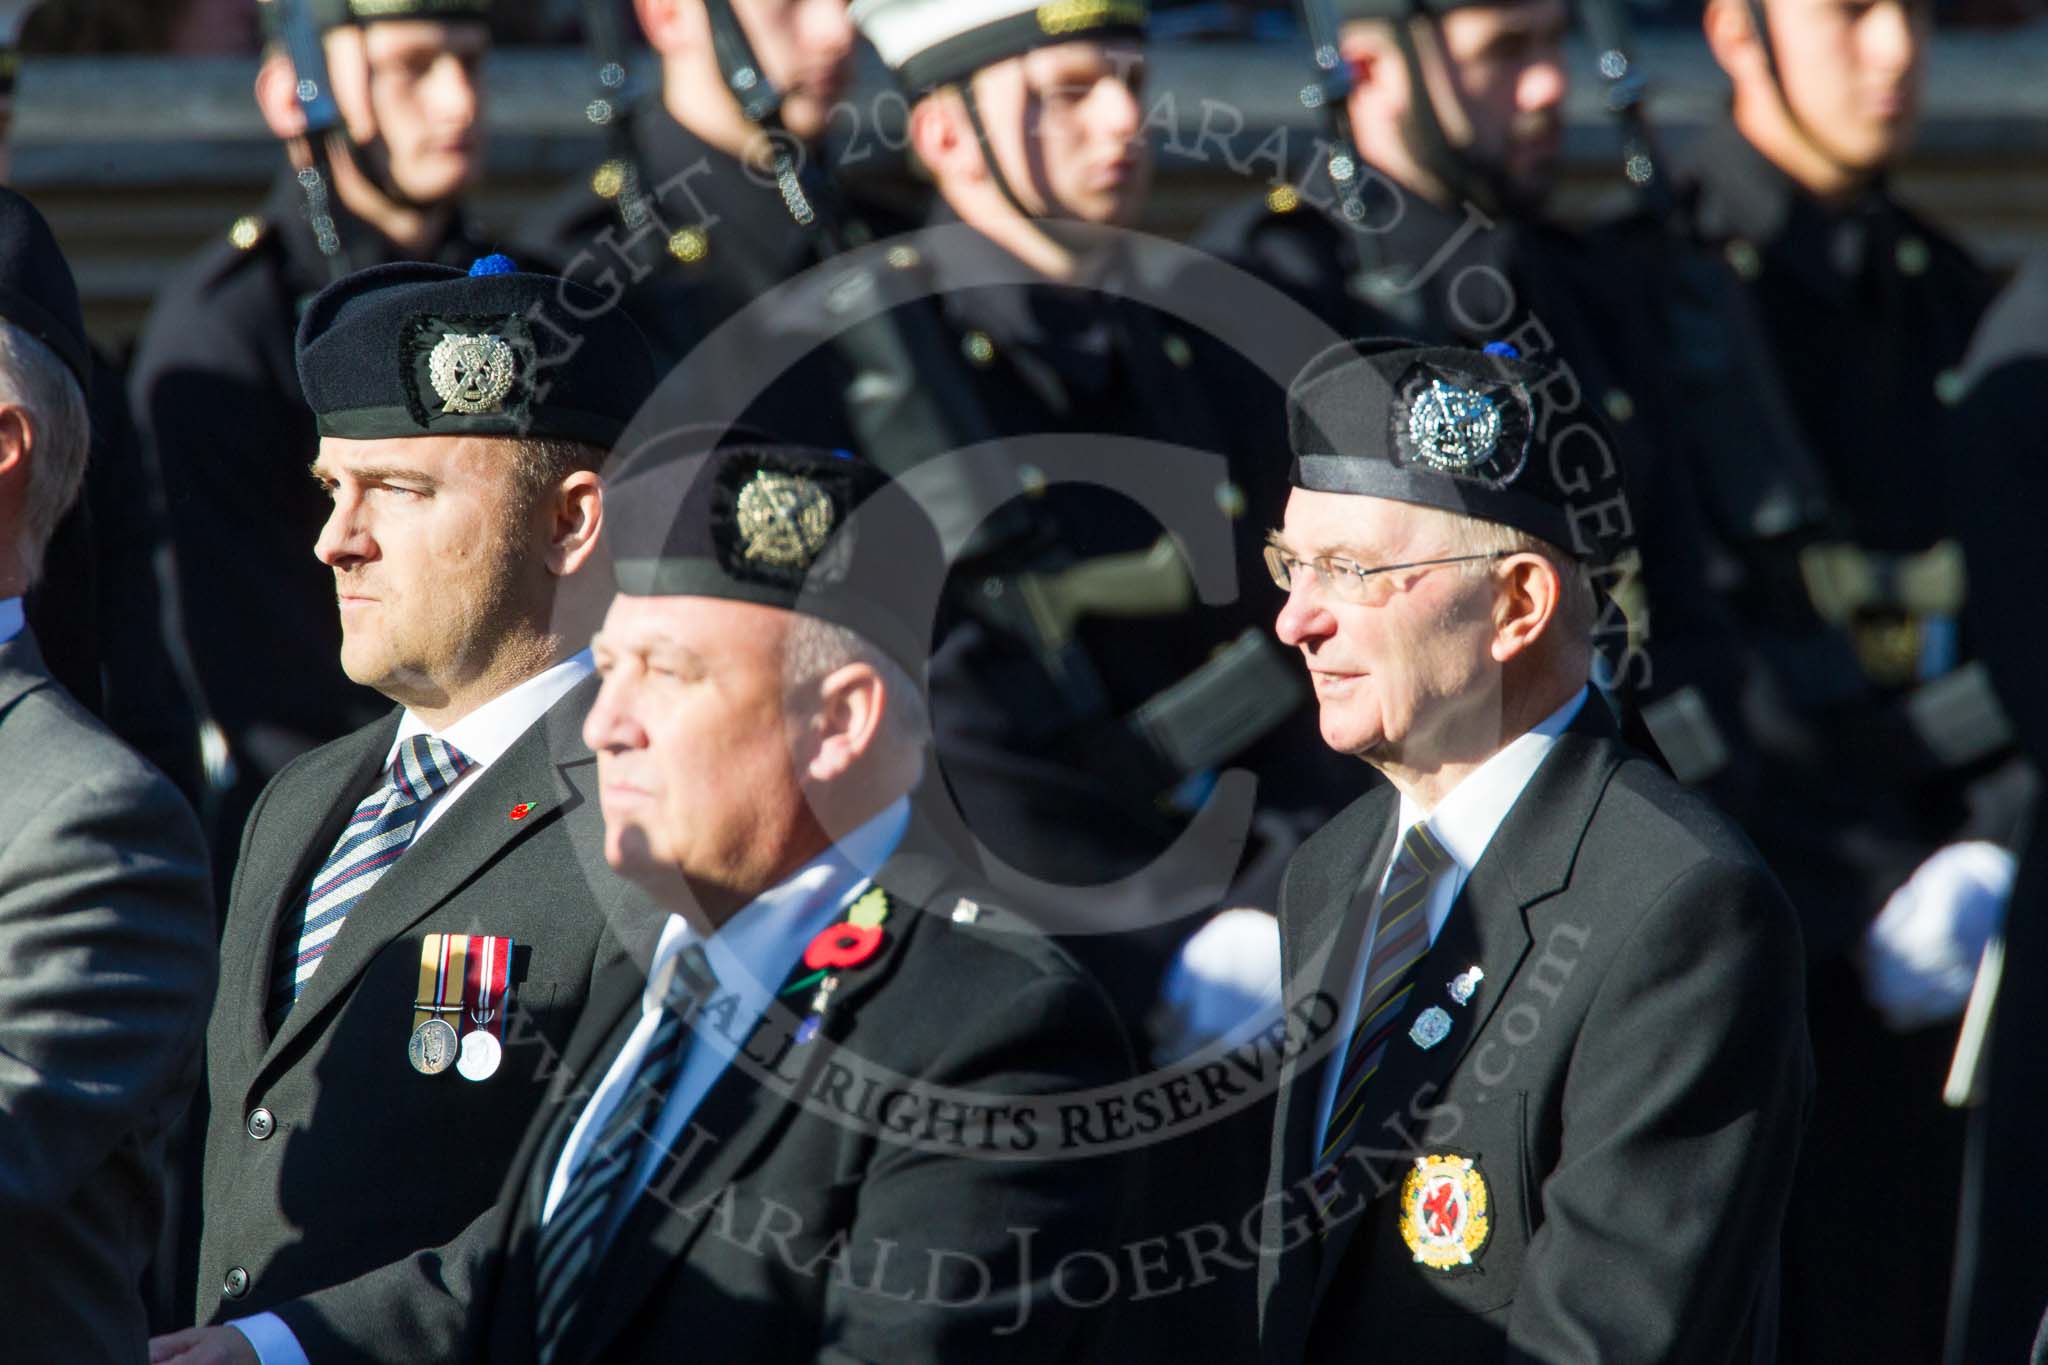 Remembrance Sunday at the Cenotaph in London 2014: Group A16 - London Scottish Regimental Association.
Press stand opposite the Foreign Office building, Whitehall, London SW1,
London,
Greater London,
United Kingdom,
on 09 November 2014 at 12:03, image #1306